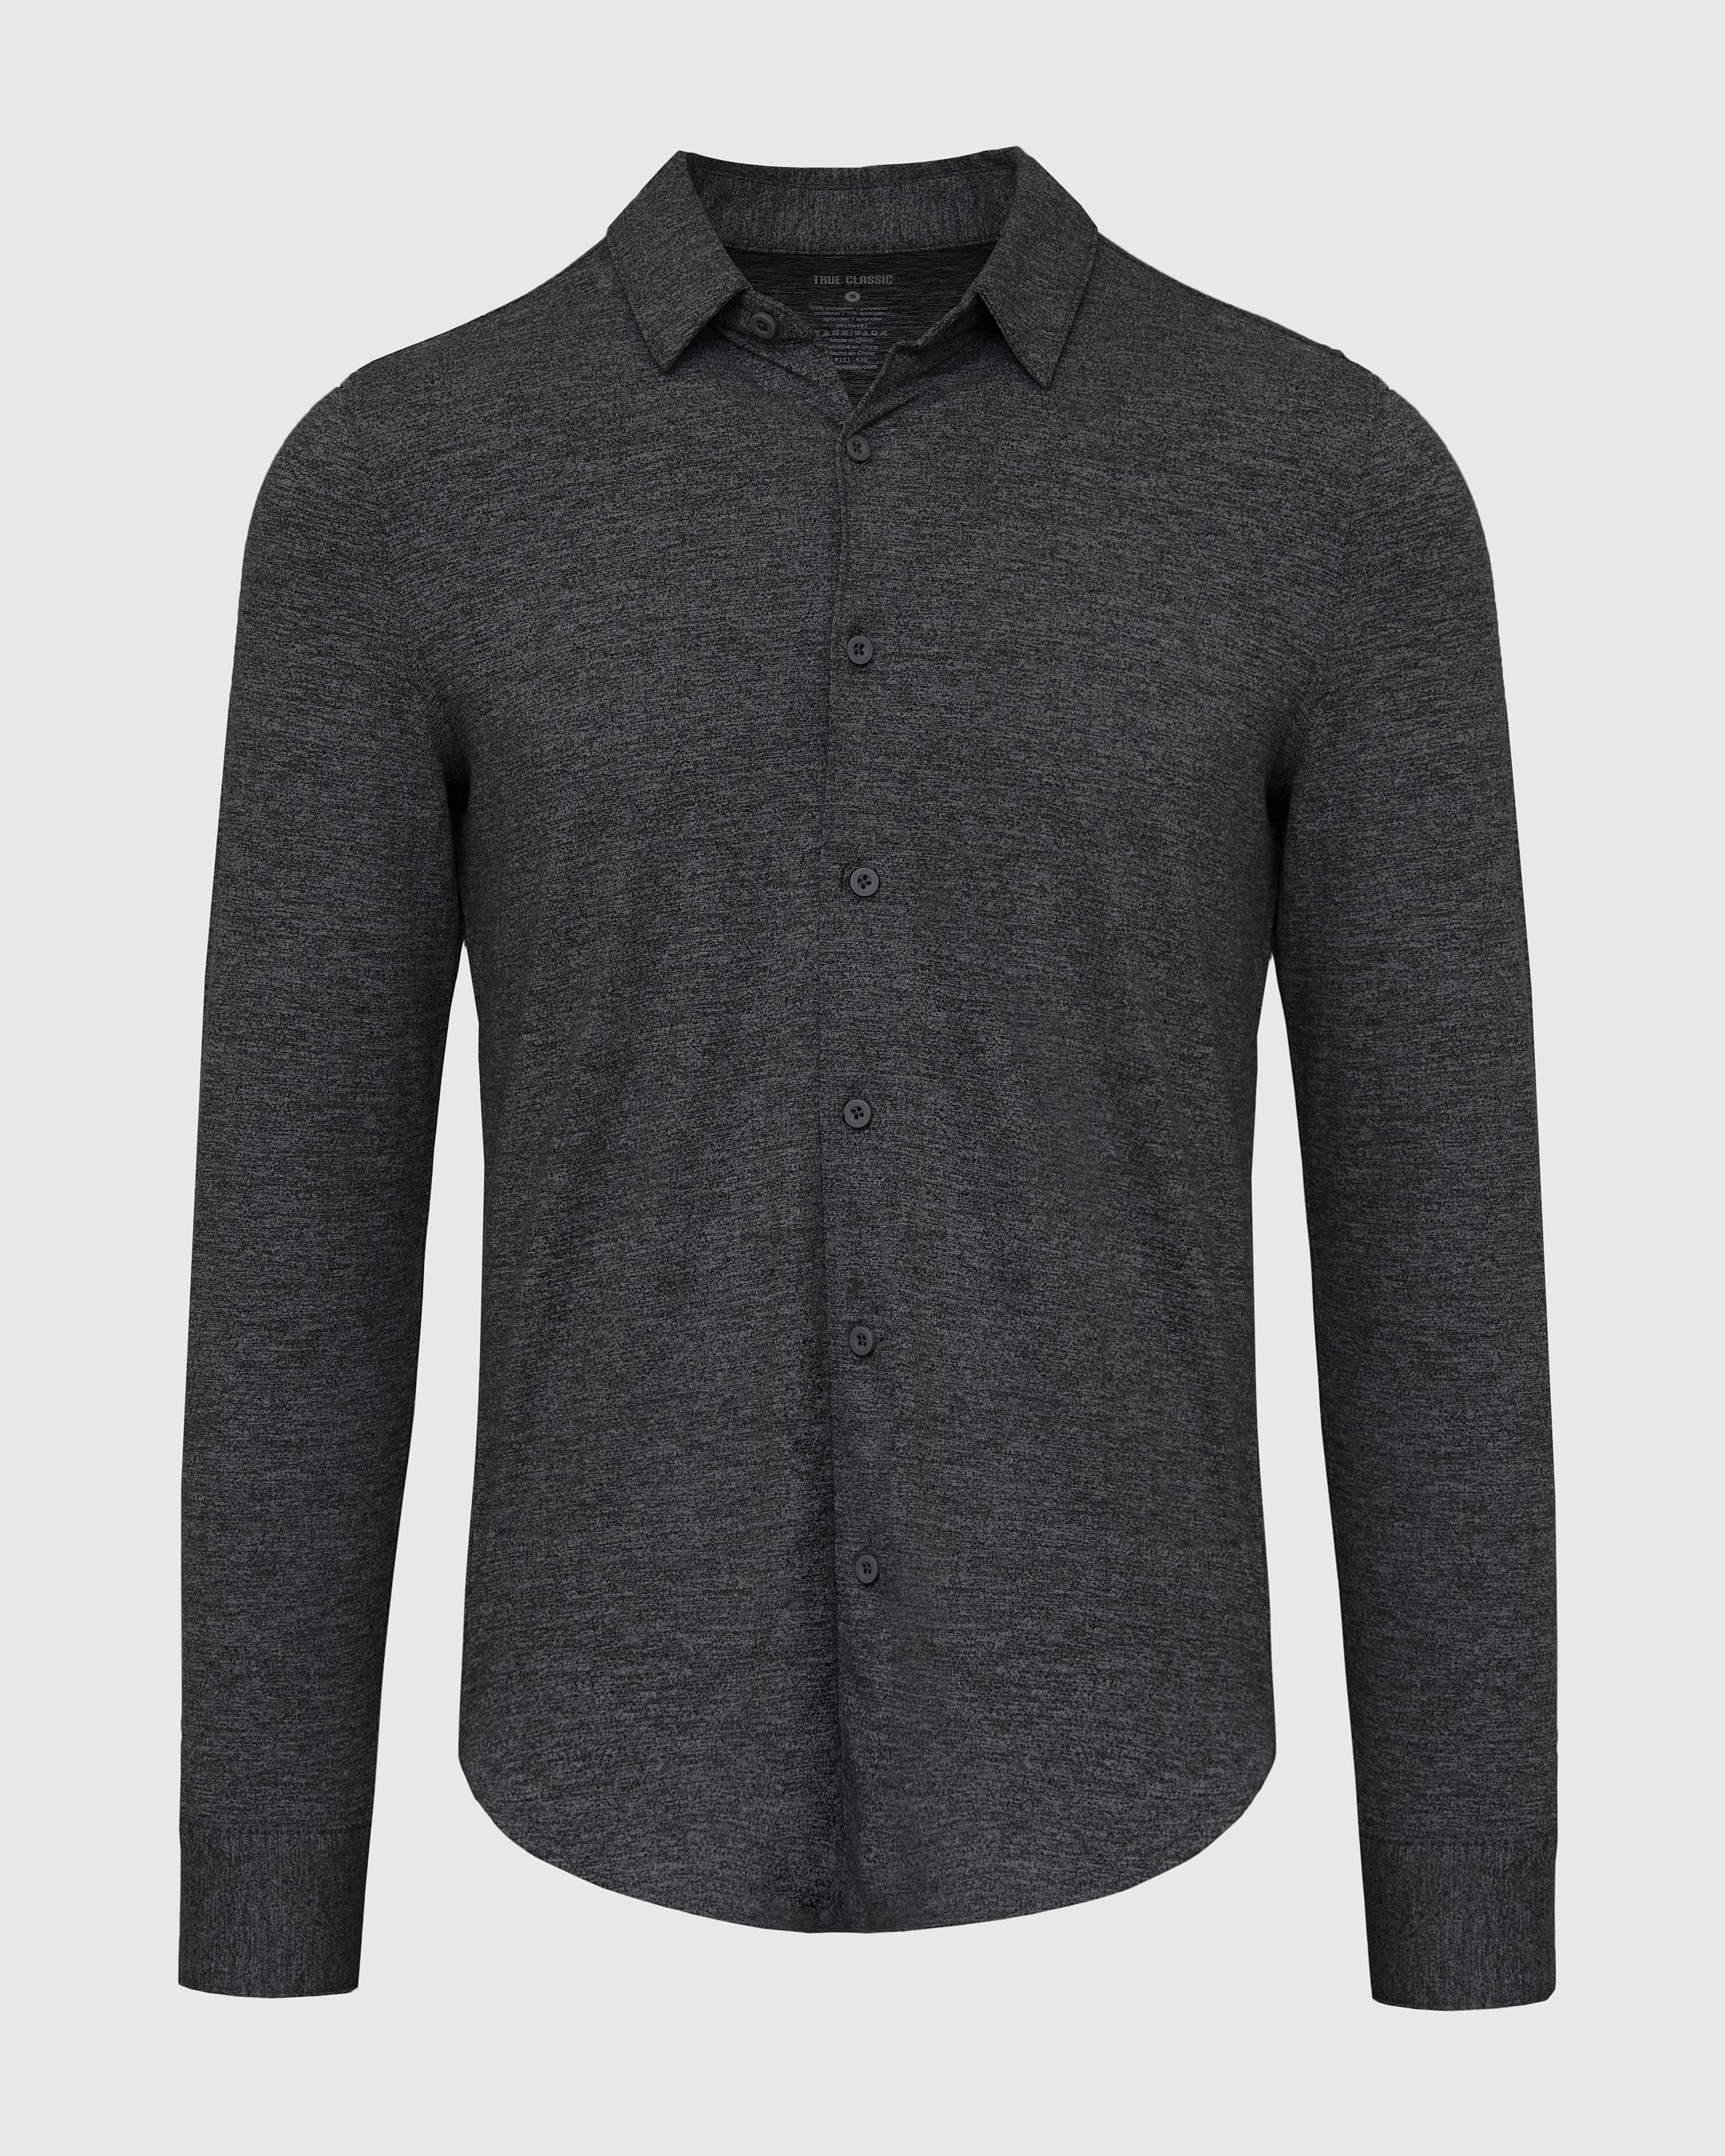 Charcoal Heather Gray Do-It-All Comfort Button Up Shirt